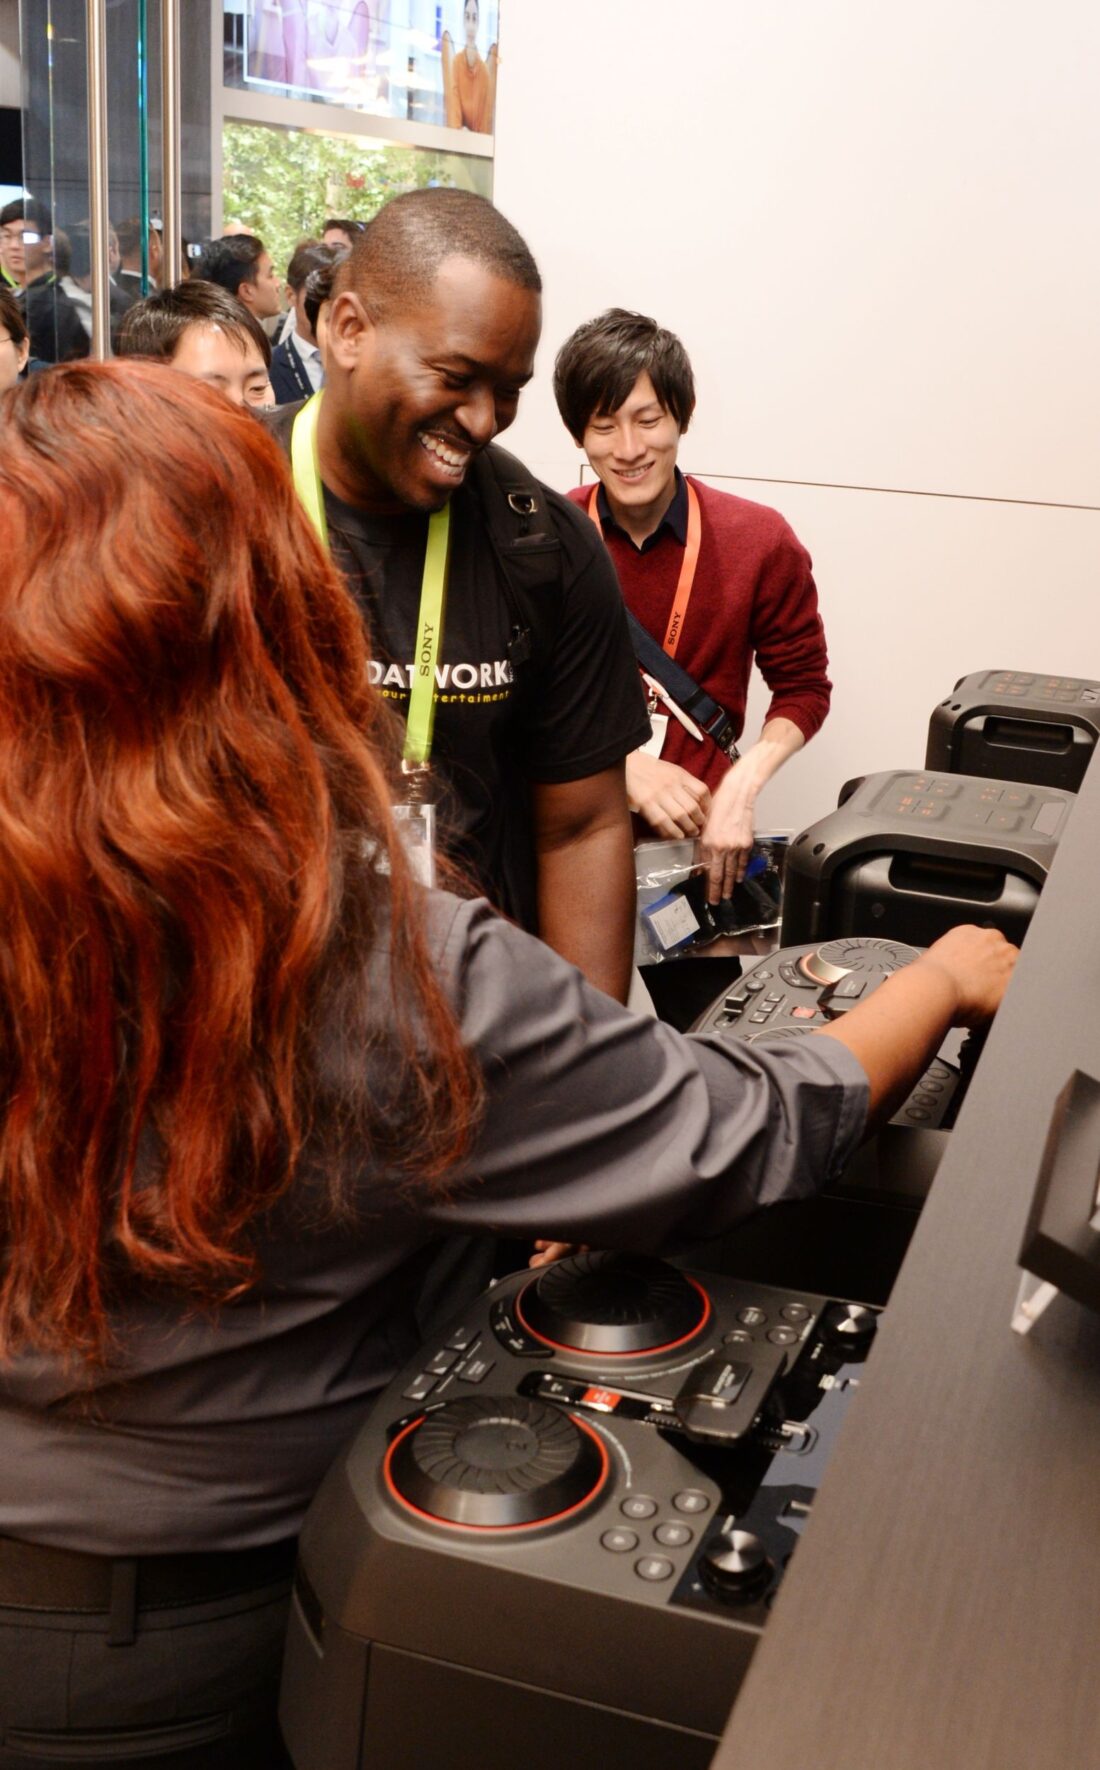 Some CES attendees try out the turntables and crossfaders on LG’s XBOOM Speaker.